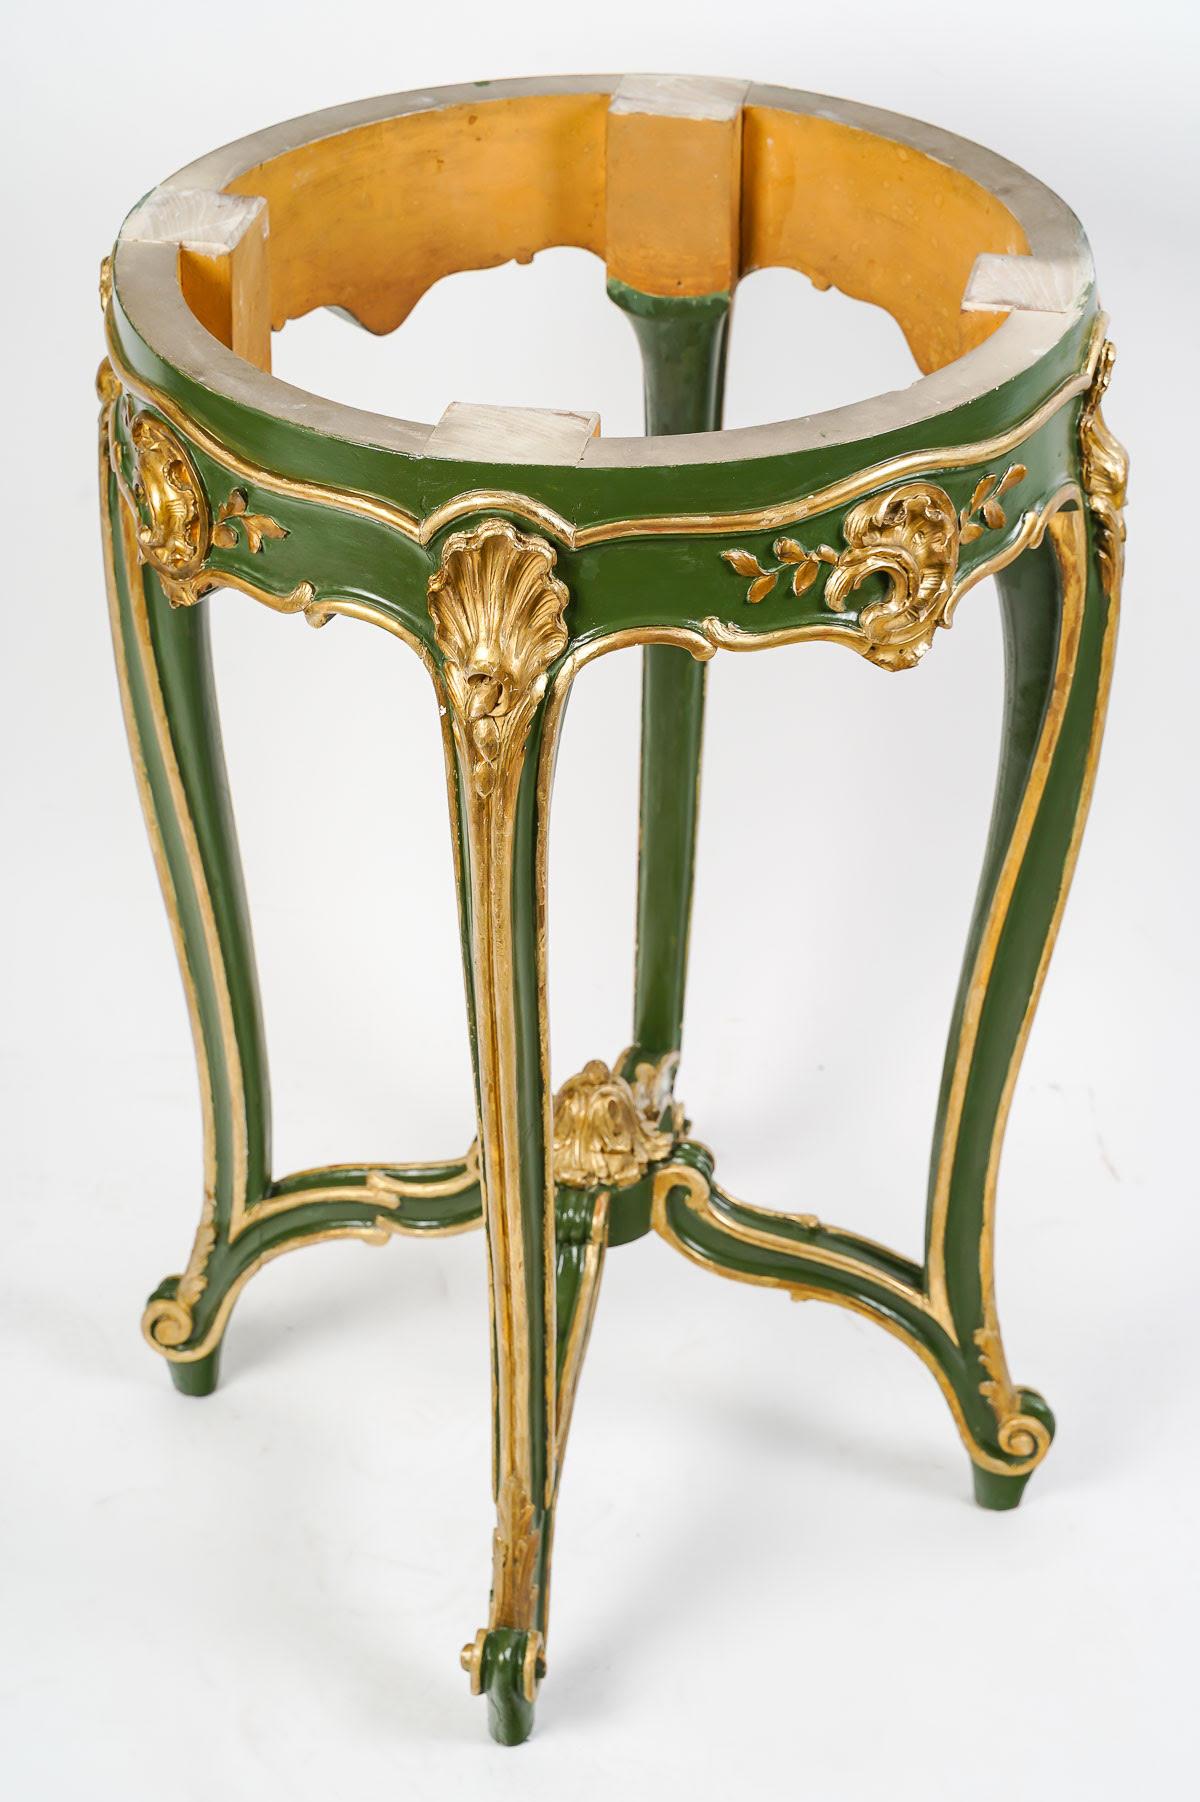 20th Century Carved, Painted and Gilded Wood Pedestal Table, Louis XV style. For Sale